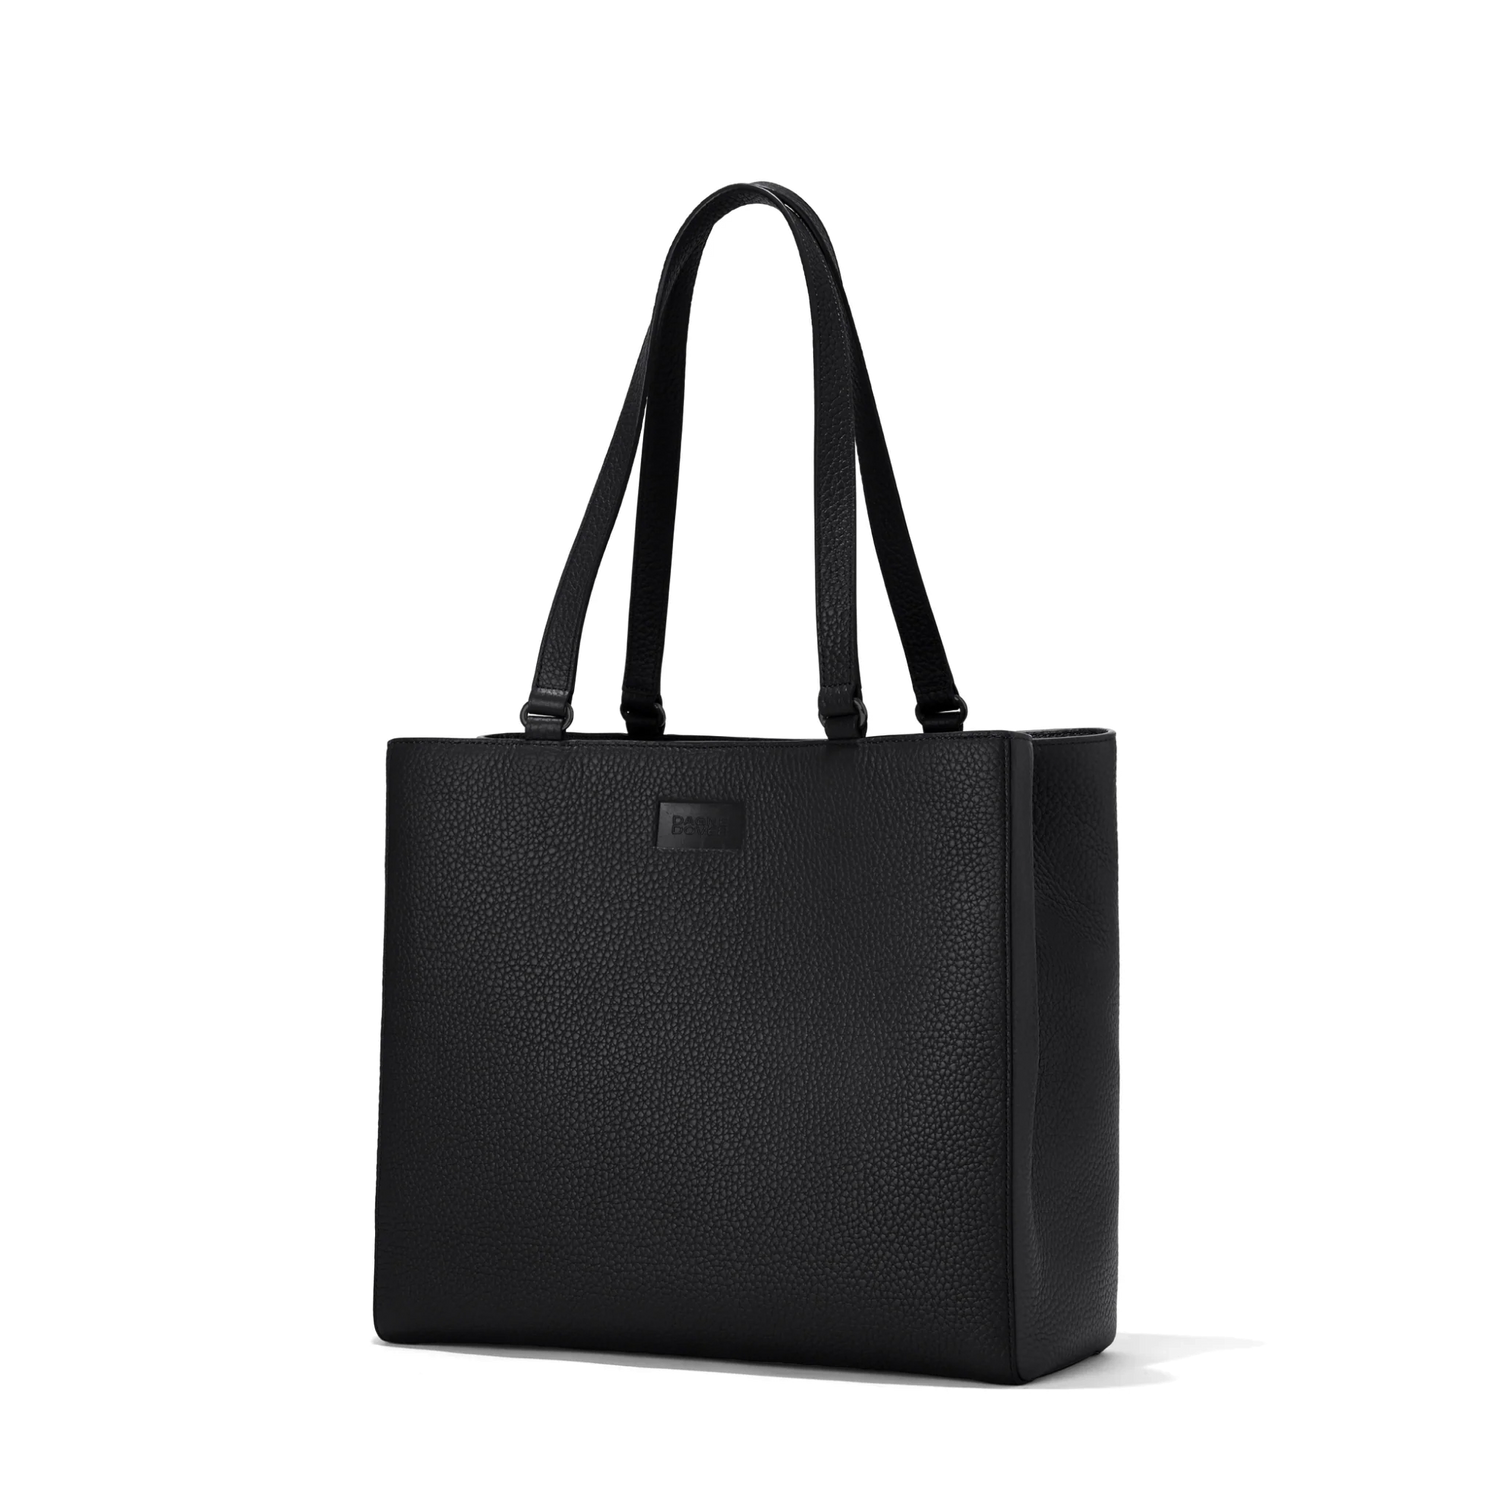 Shopper bag luxe - Discover online a large selection of Shopper bags - Free  delivery